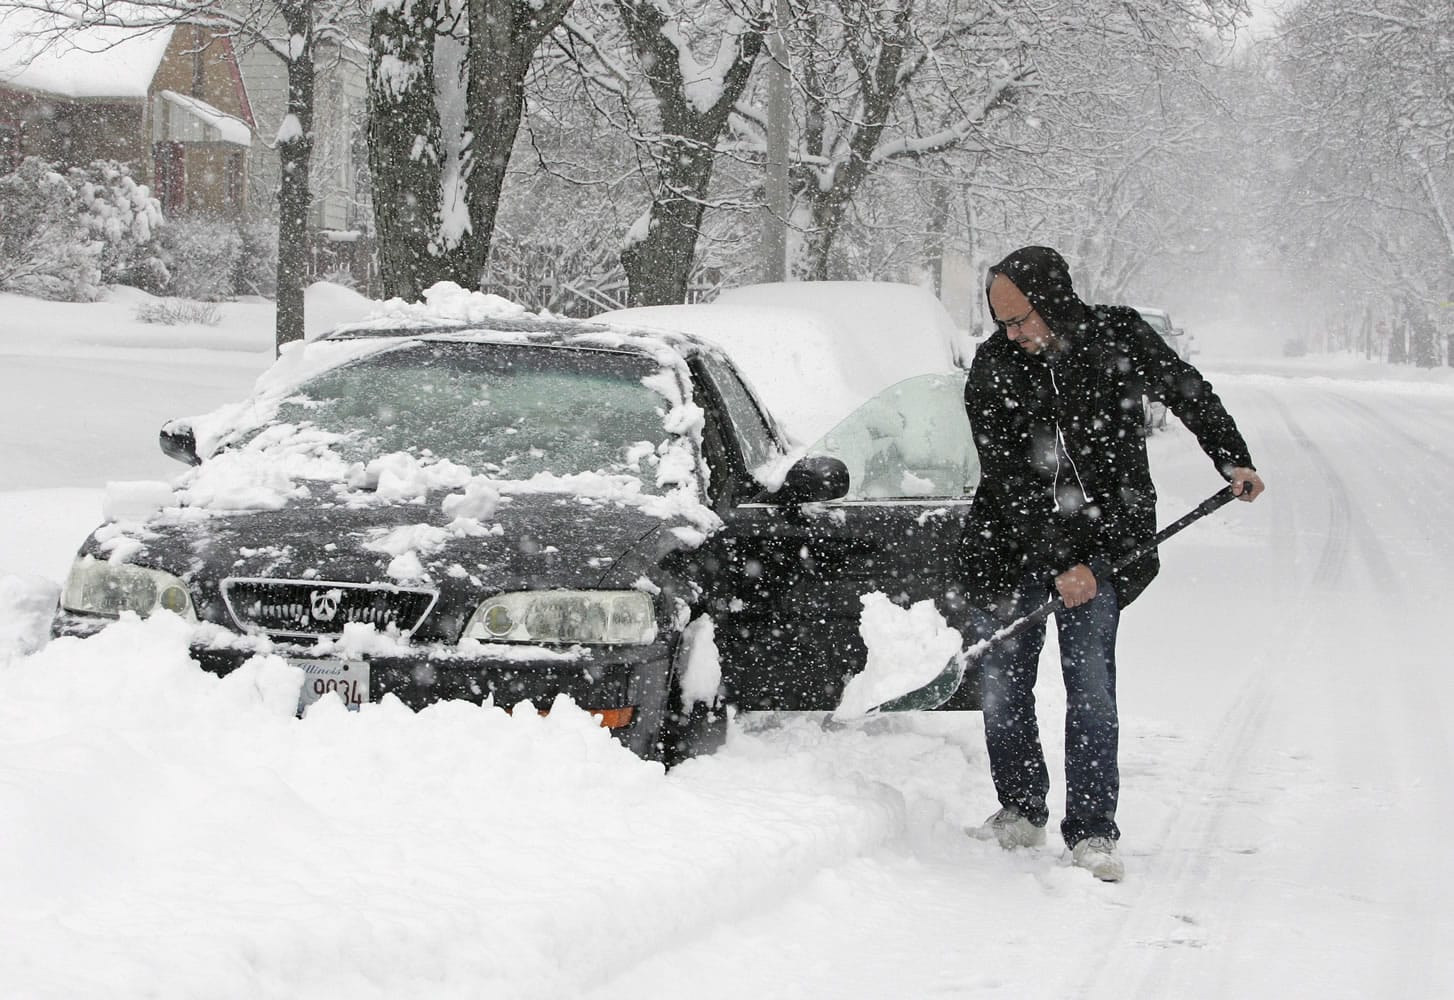 Cris Colon shovels snows from around his car Tuesday in Rockford, Ill.